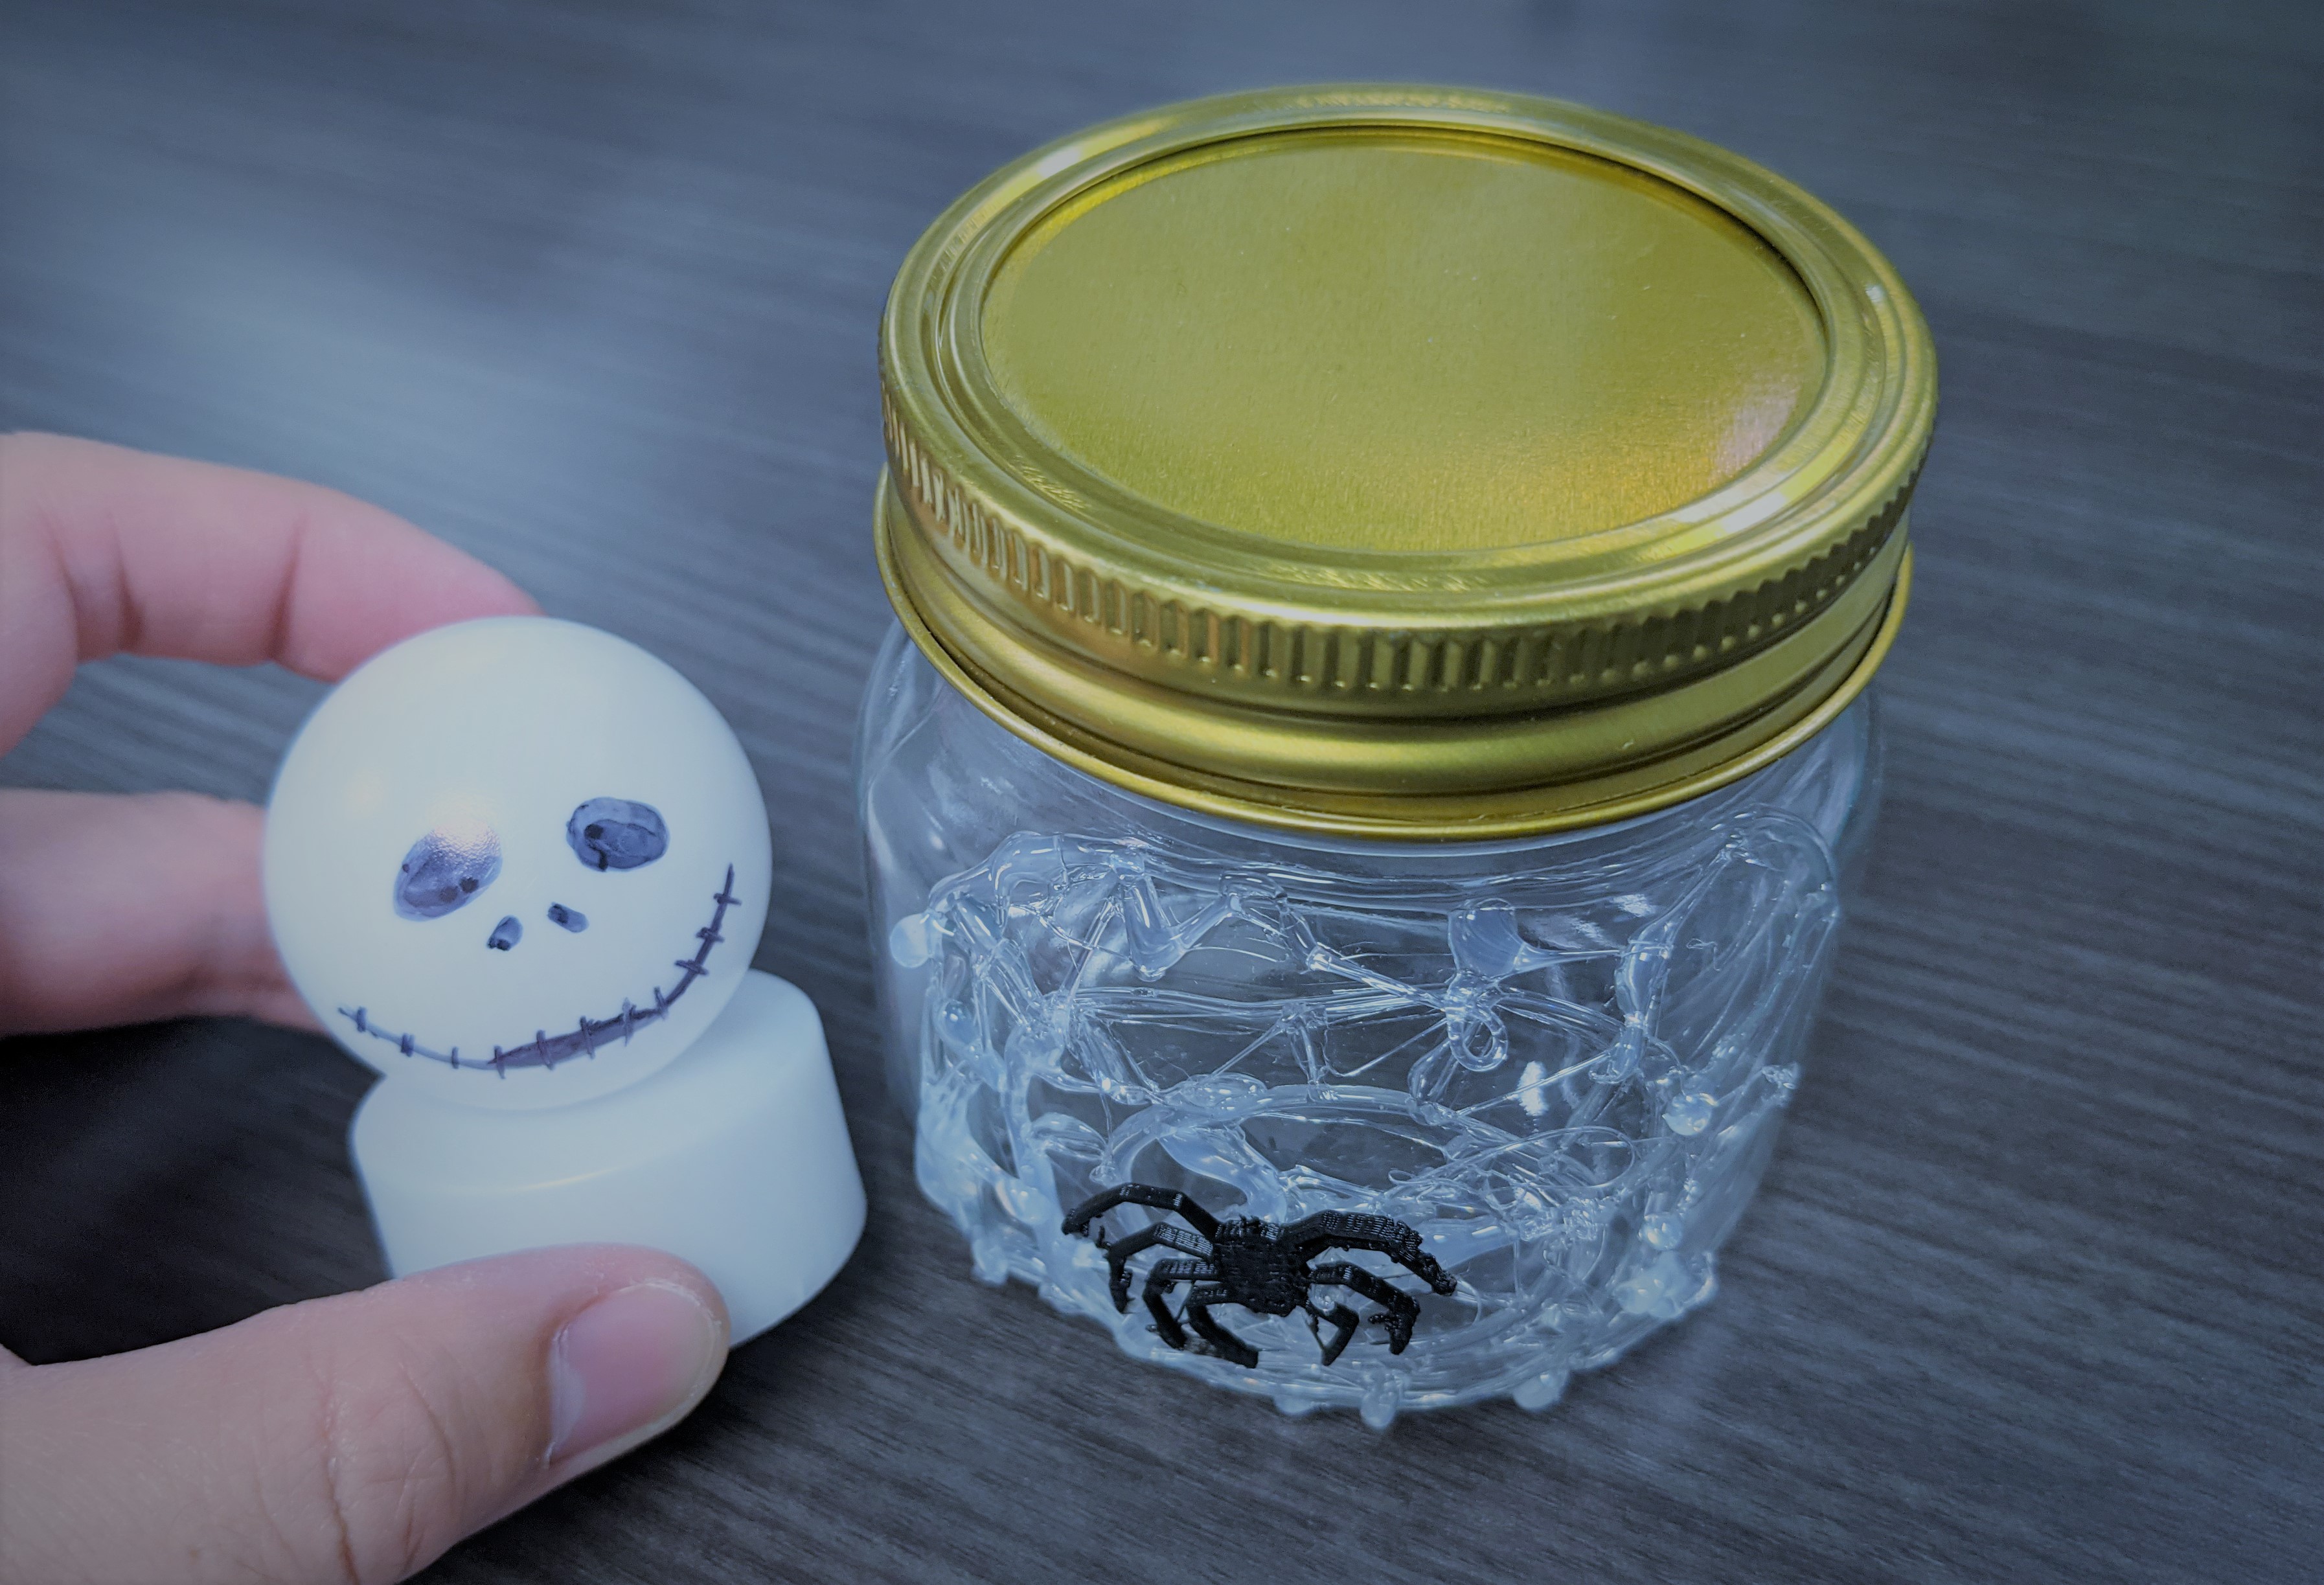 Jack Skellington face on Ping Pong ball and mason jar with web and spider